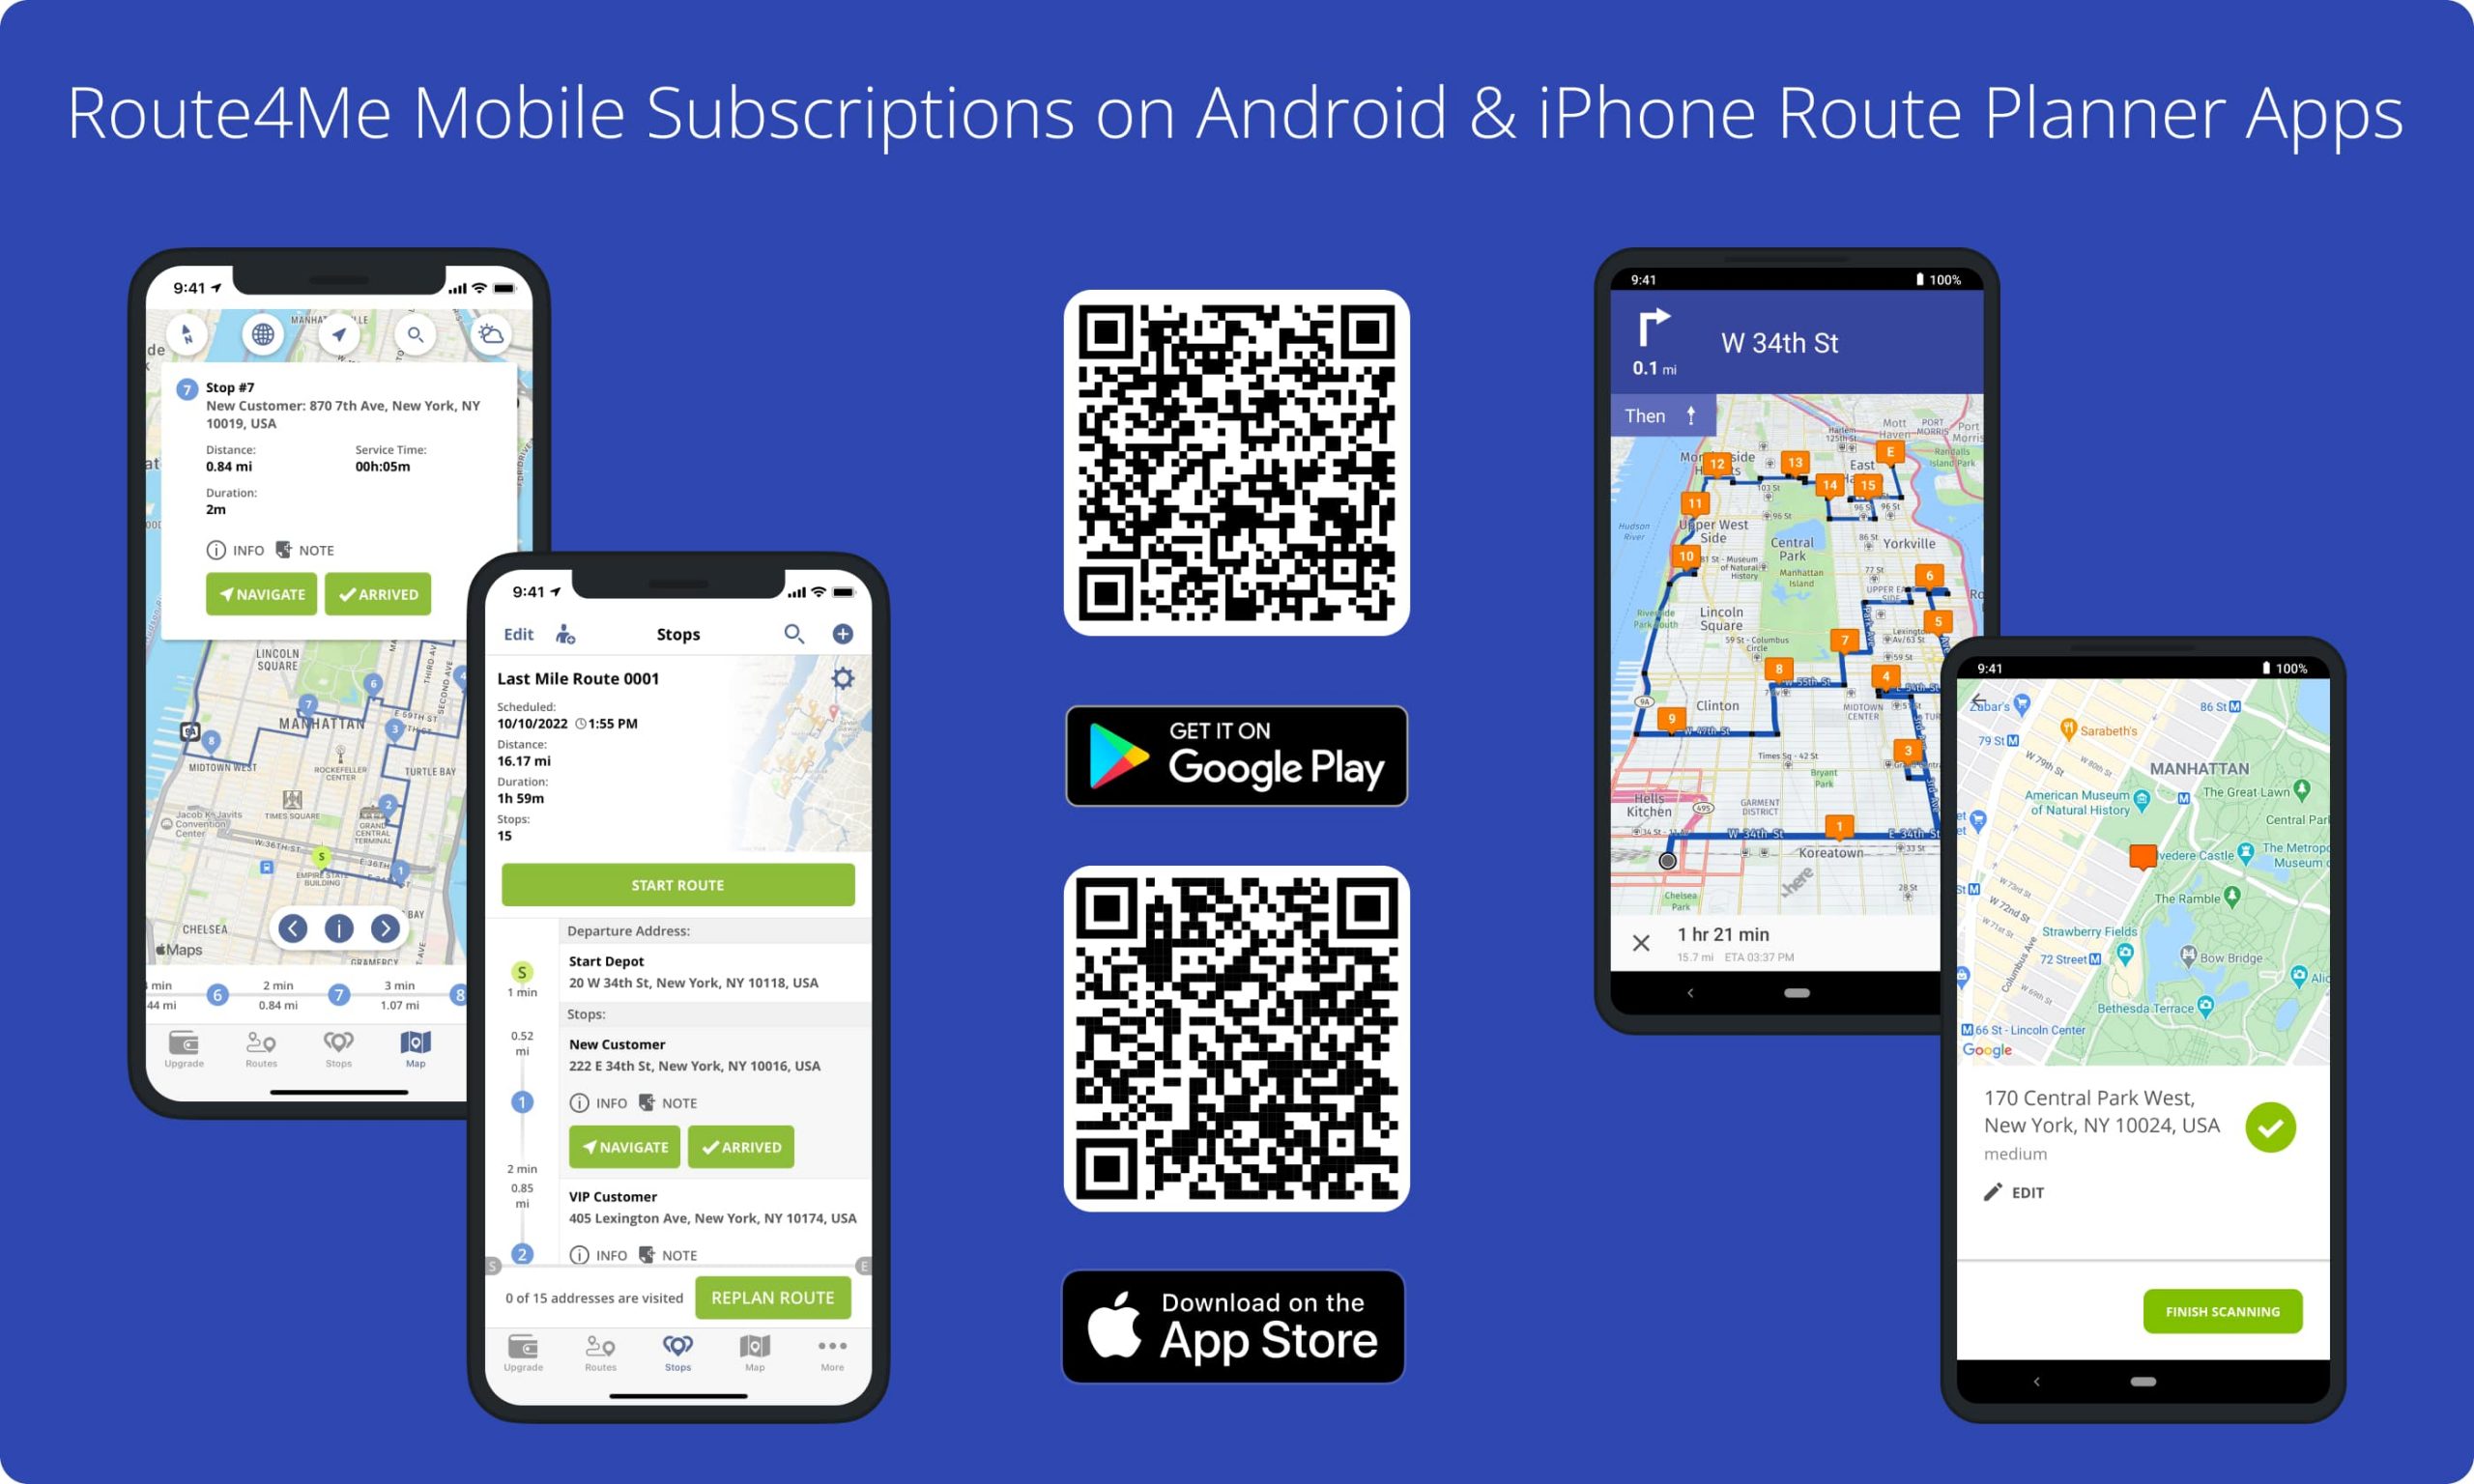 Route4Me Mobile Subscriptions on the iOS and Android Route Planning Apps.